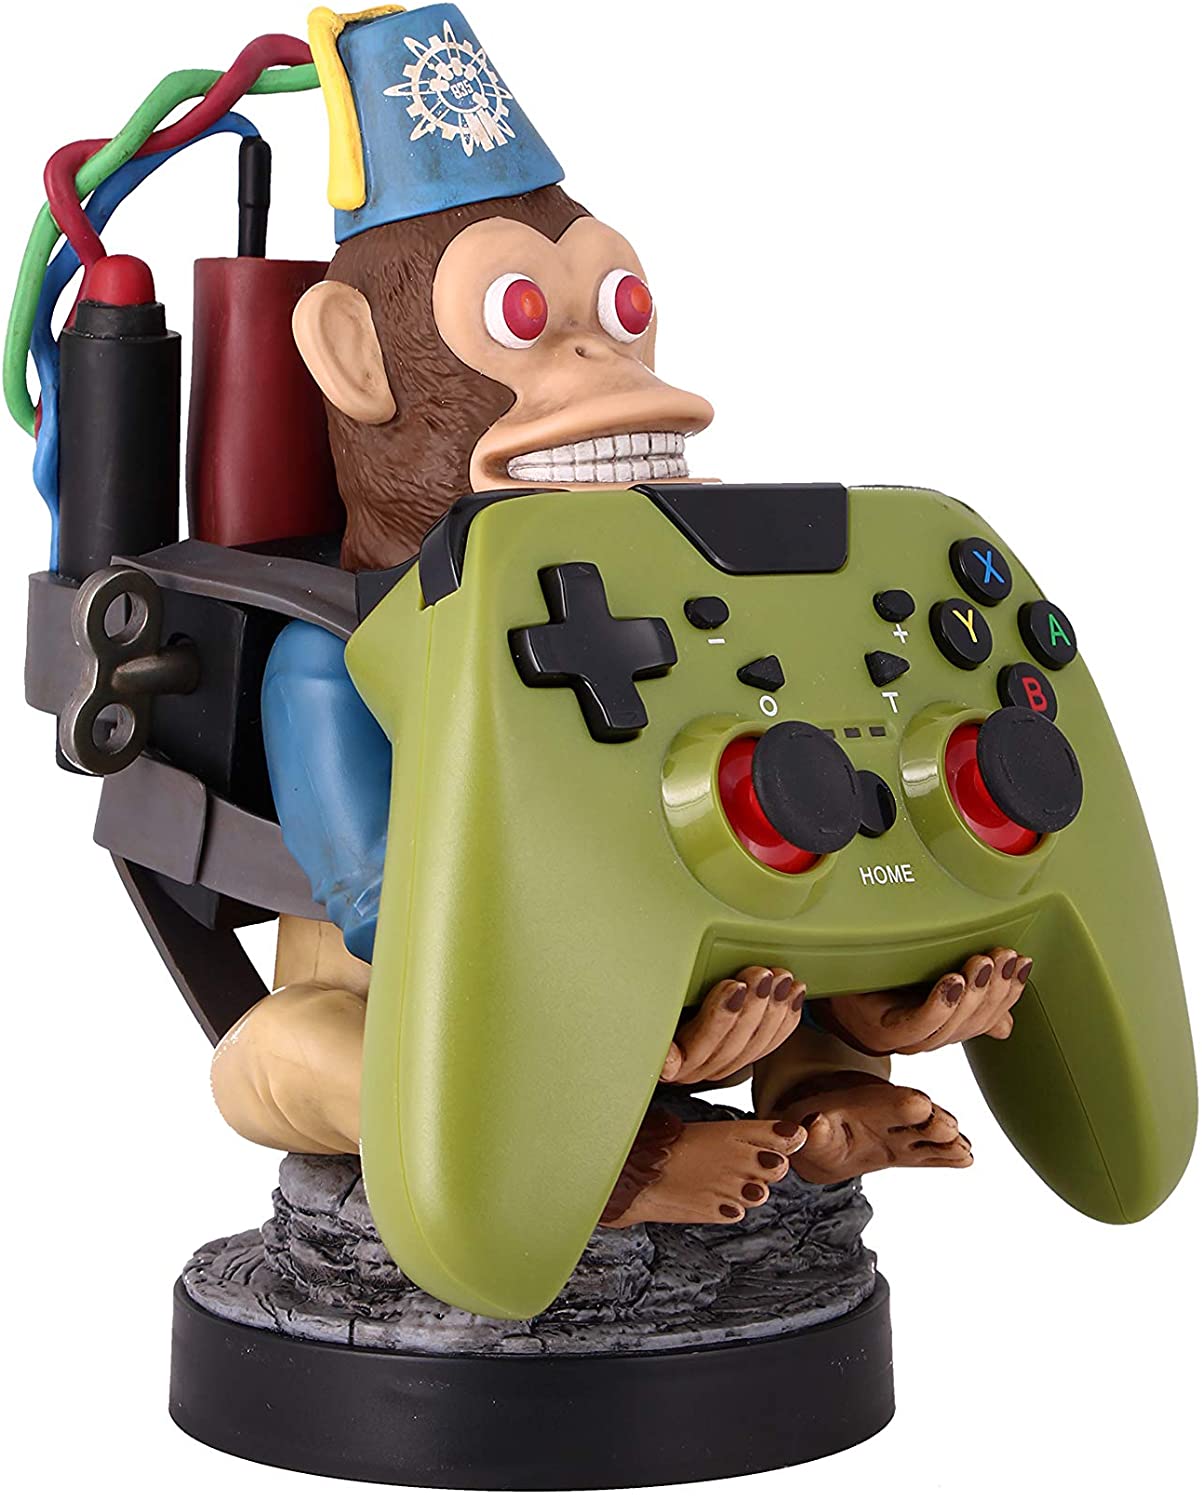 Monkey Bomb (Call of Duty) Controller / Phone Holder Cable Guy